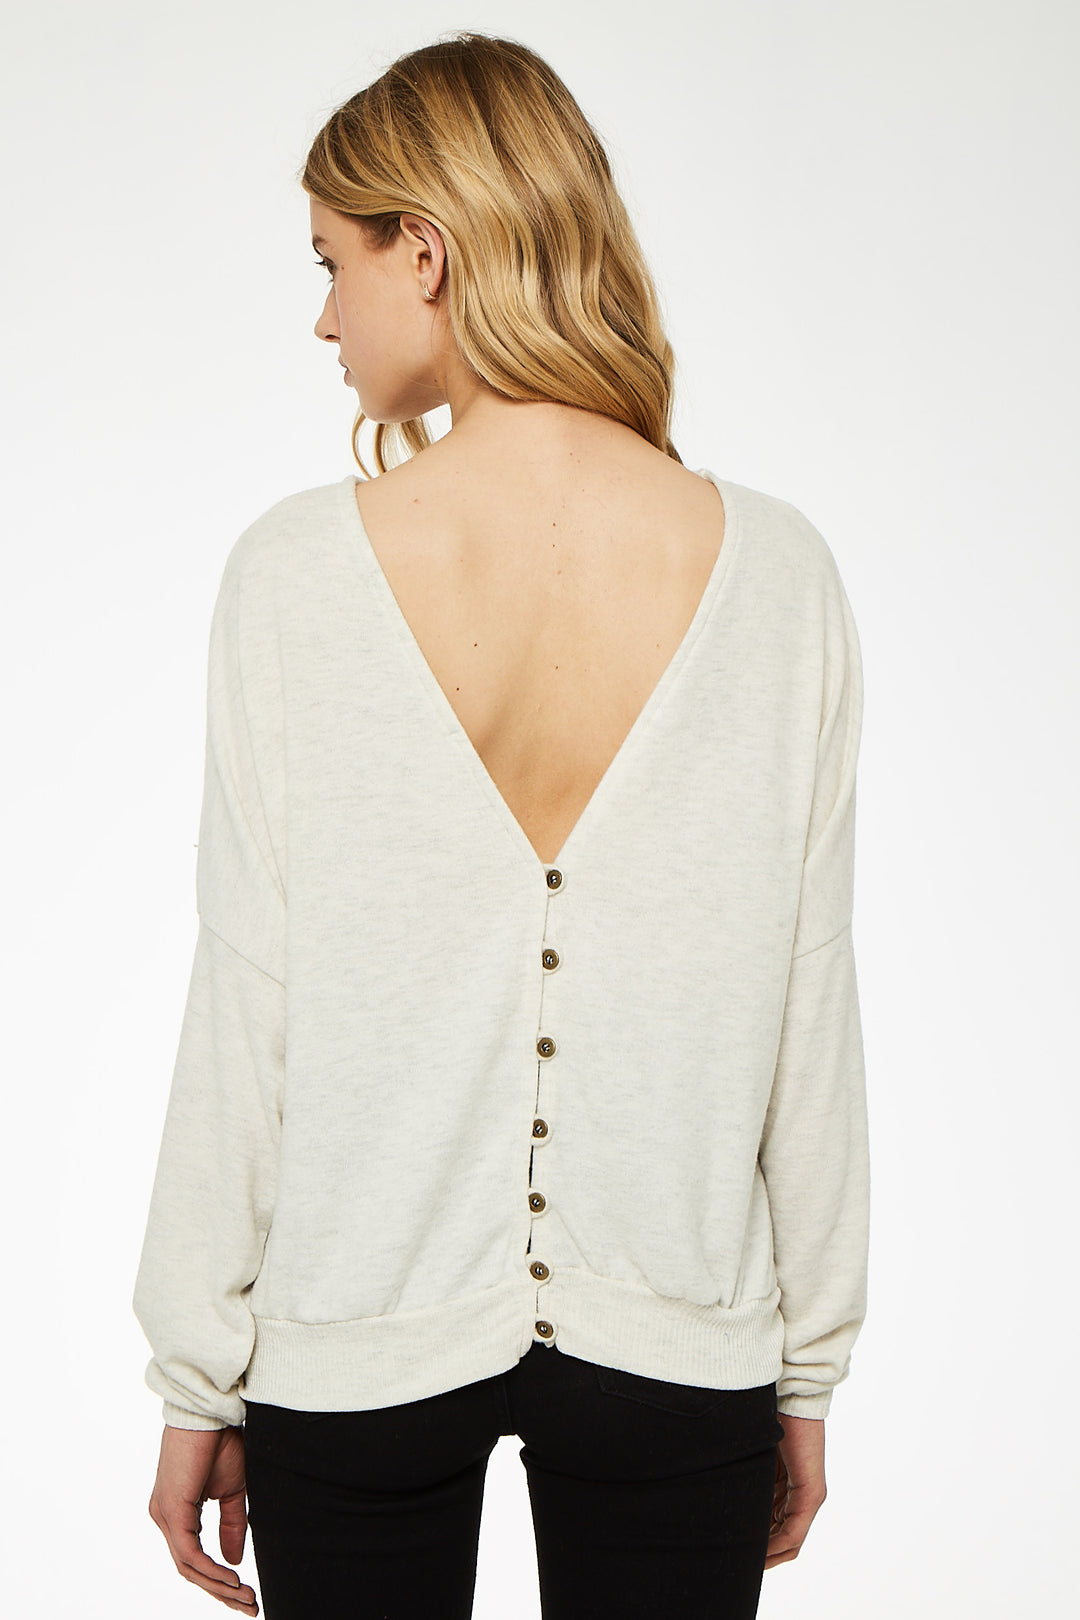 ALL THE FEELS BUTTON BACK TOP - Kingfisher Road - Online Boutique